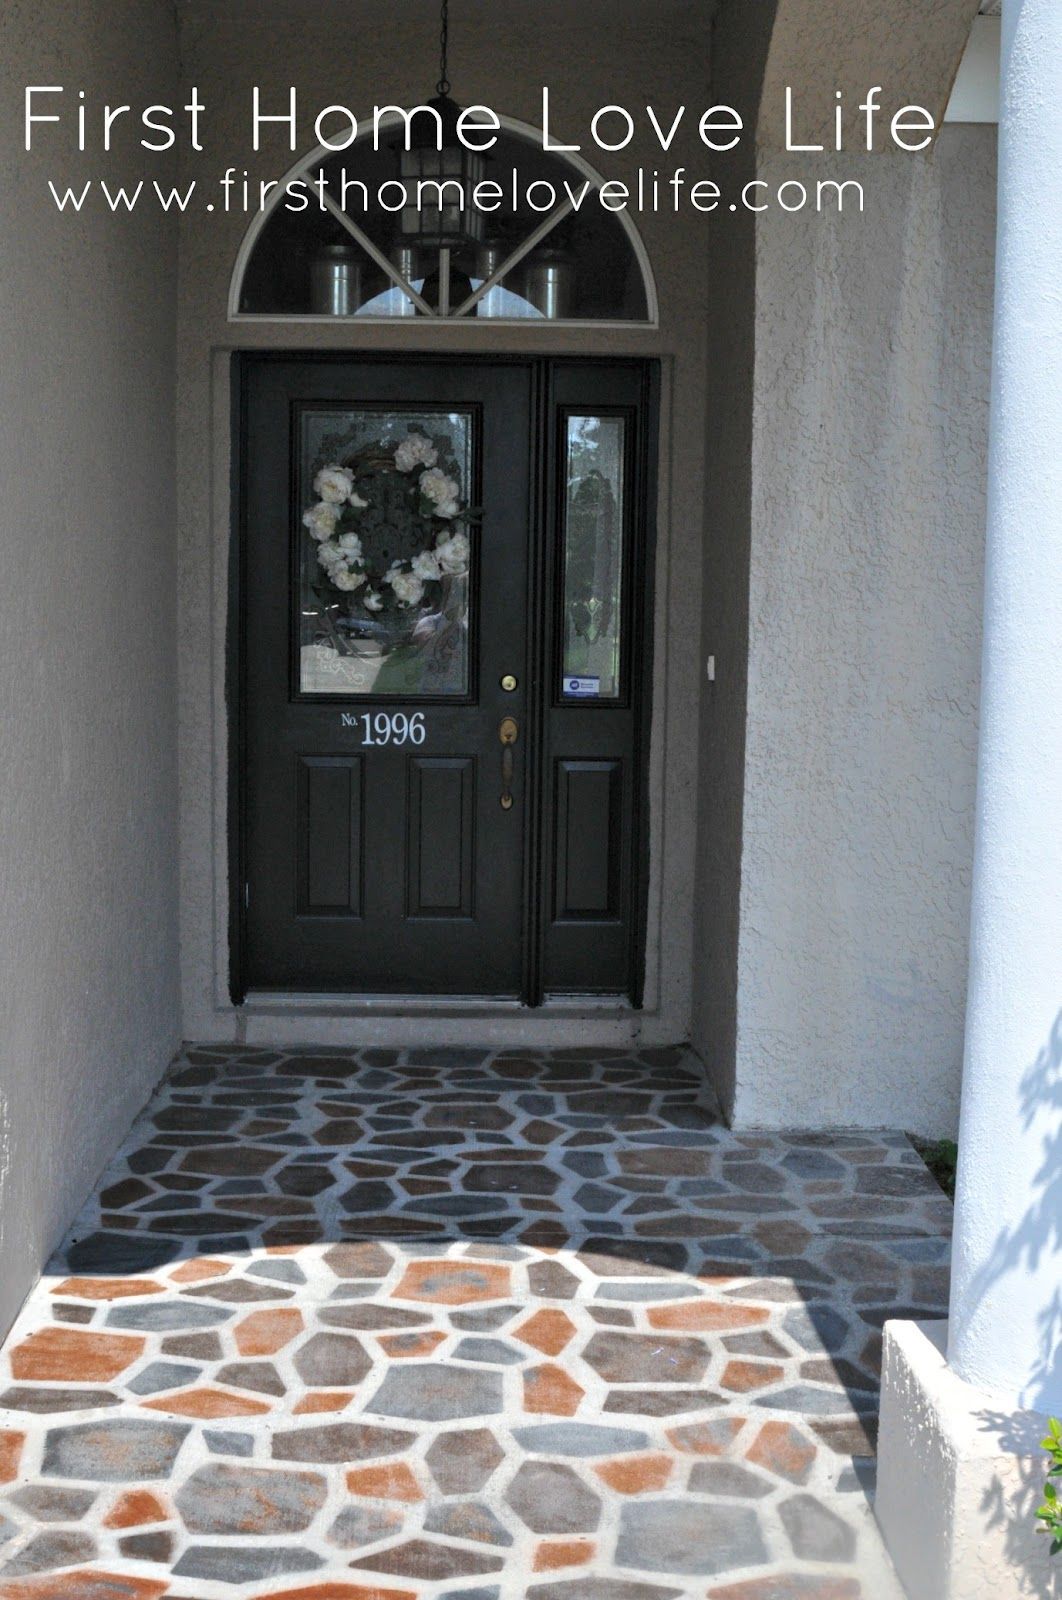 Spray Painted Patio. Use a concrete stepping stone mold as a stencil and spray p